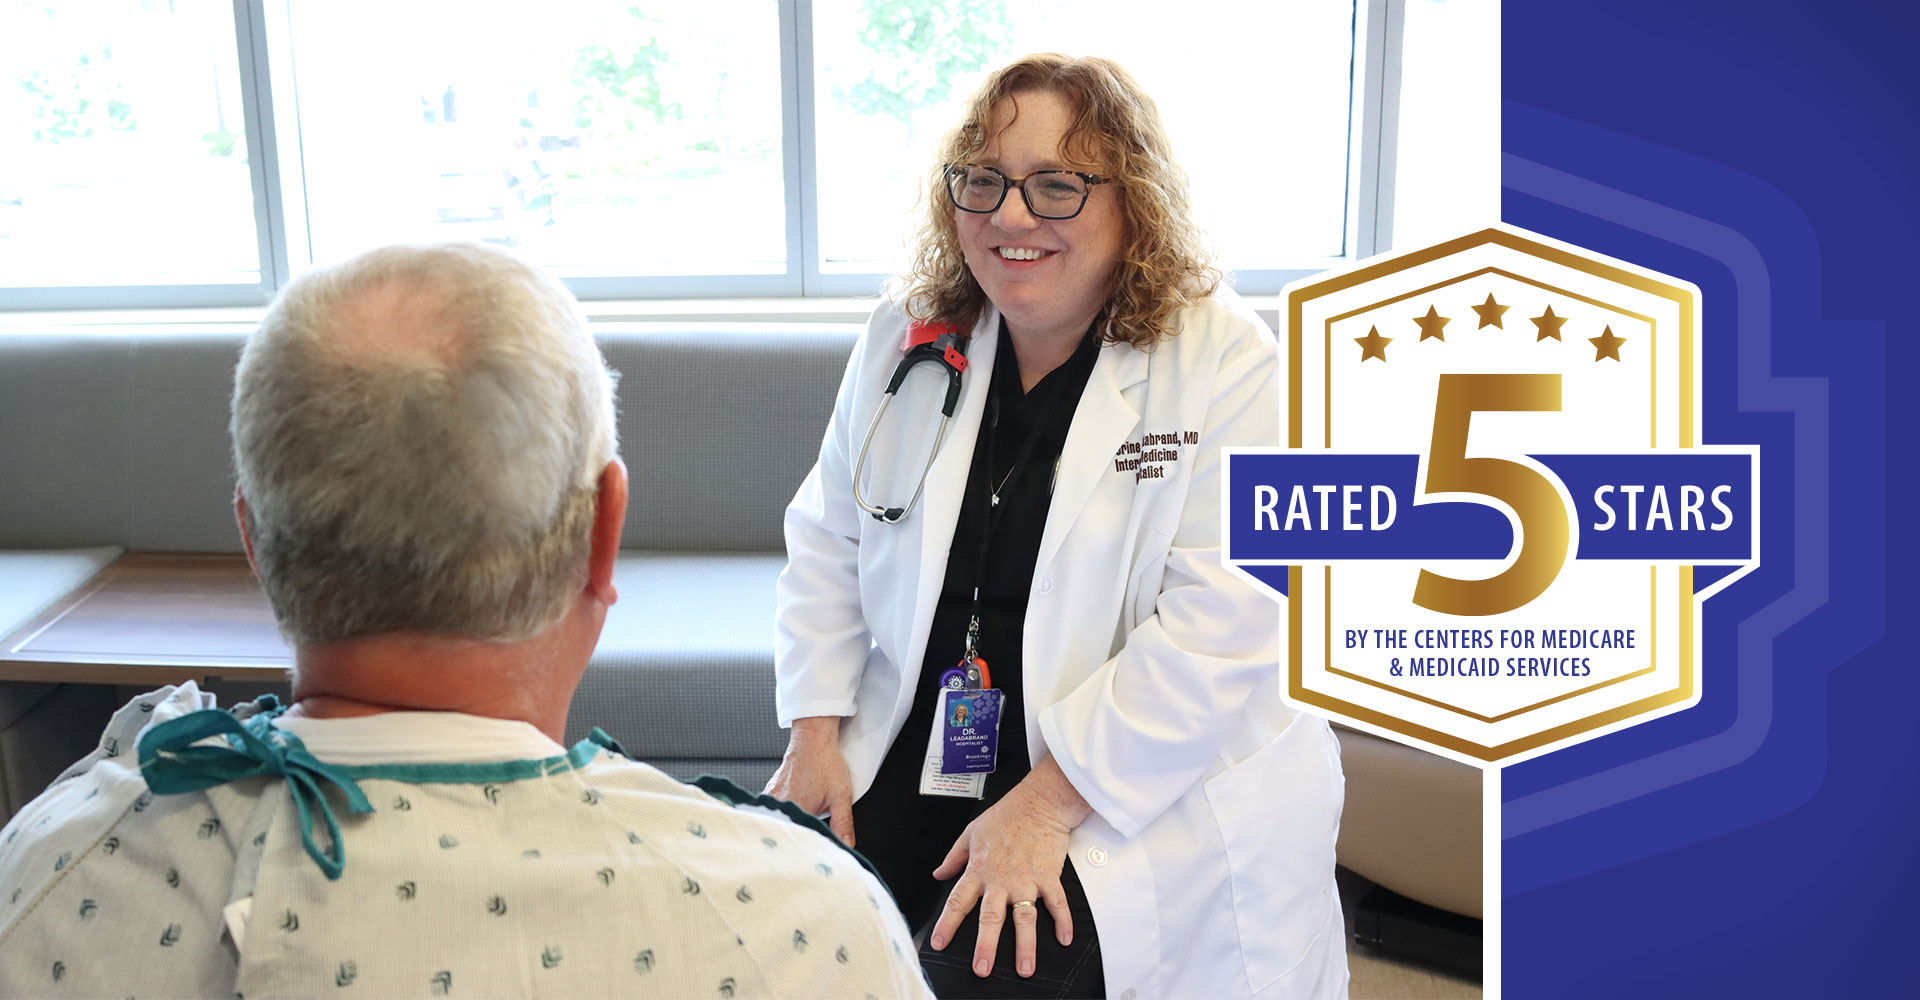 Doctor meeting with patient in hospital with the 5-star emblem overlaid on top